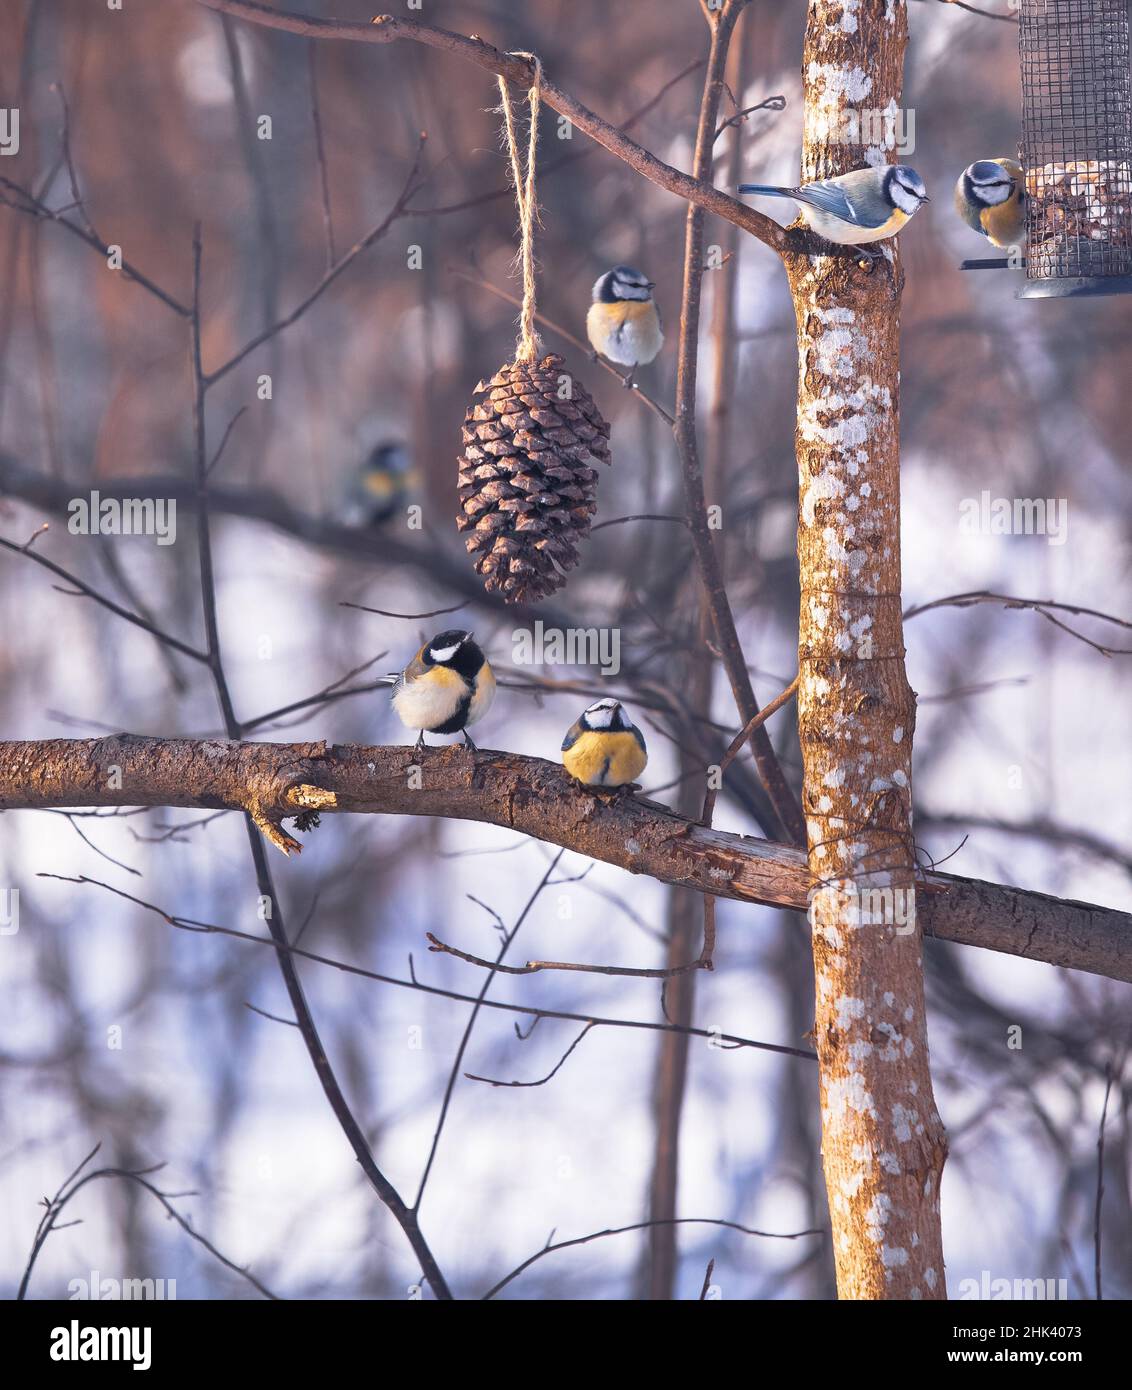 Birds eating in winter. Two birds sitting on a branch and looking at a cone. Cyanistes caeruleus and Parus major. Stock Photo